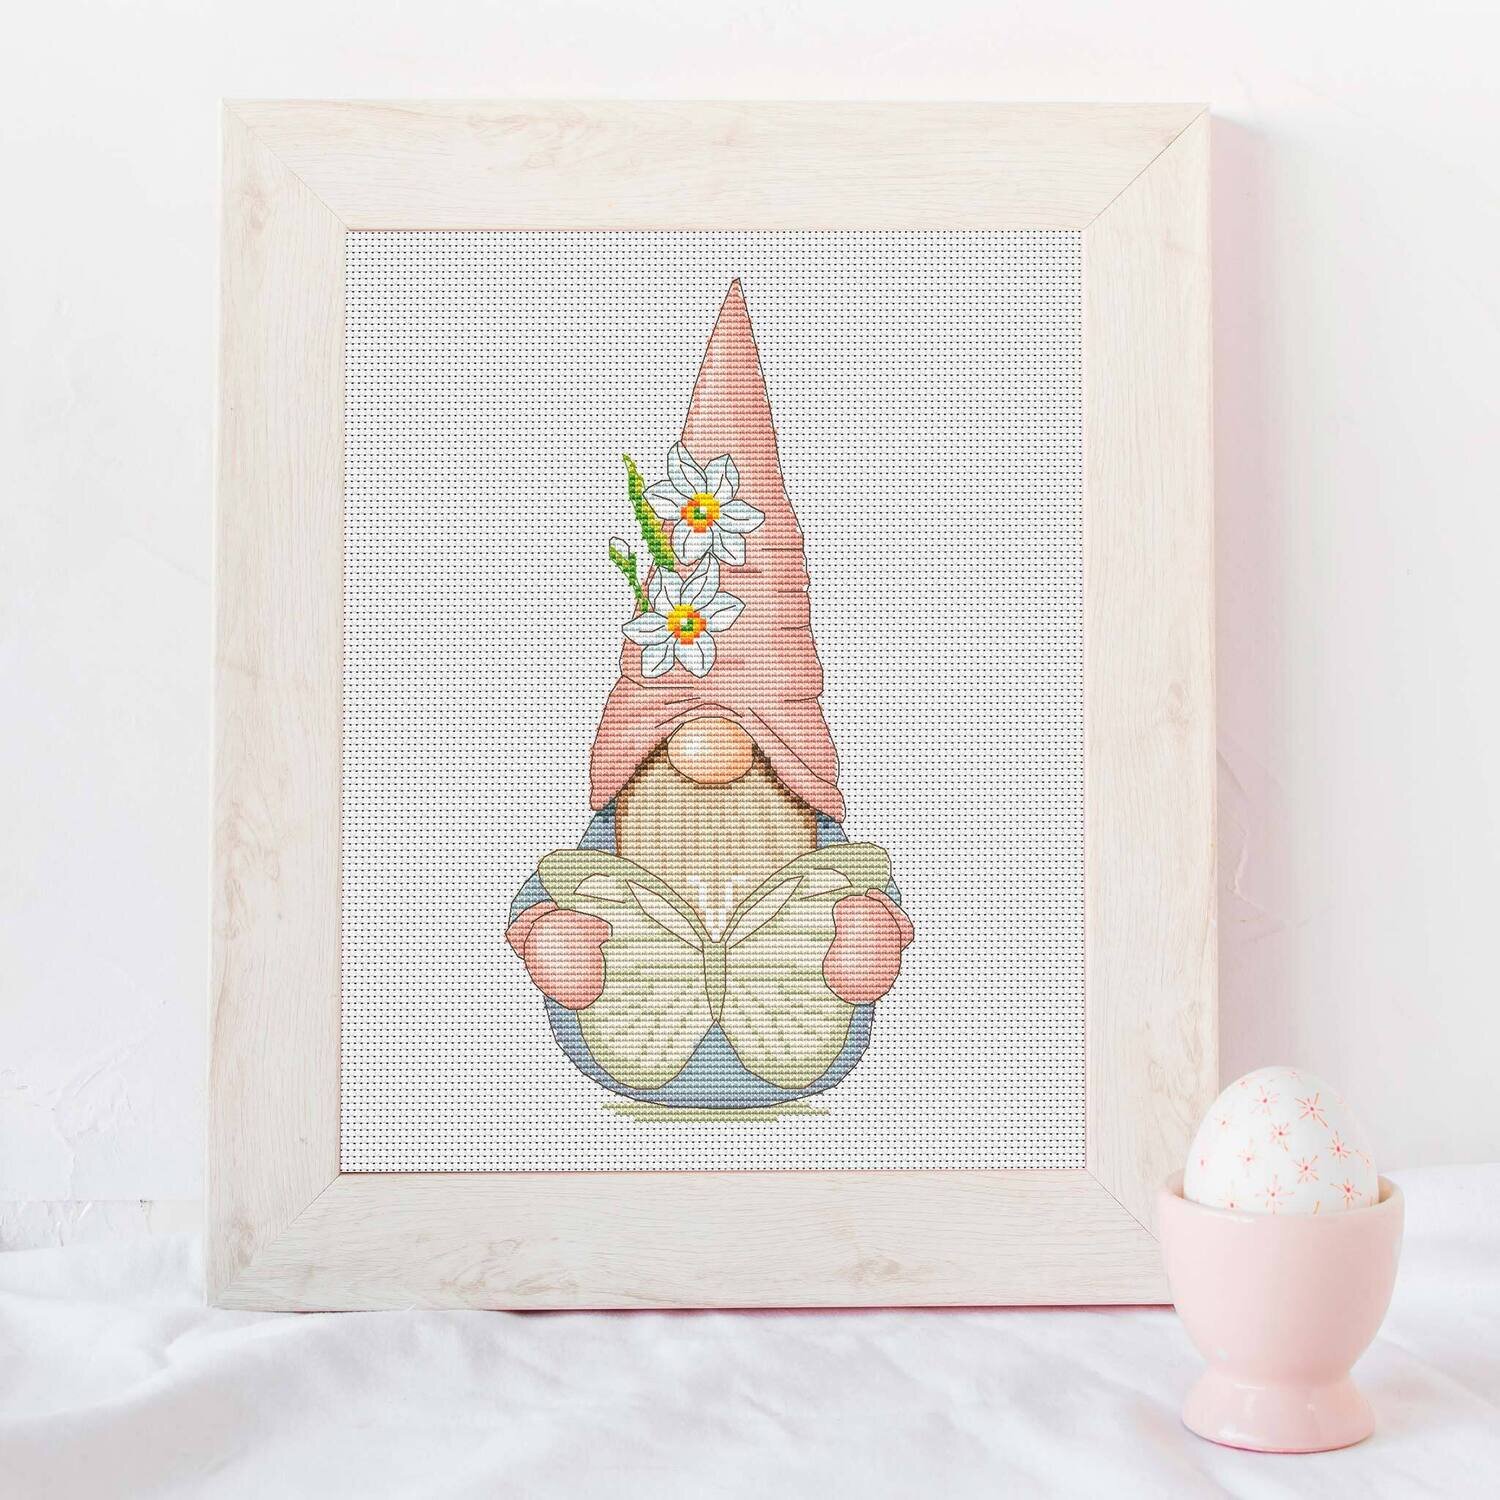 Spring gnome cross stitch pattern, Gnome with butterfly, Gnomes cross stitch, Counted cross stitch